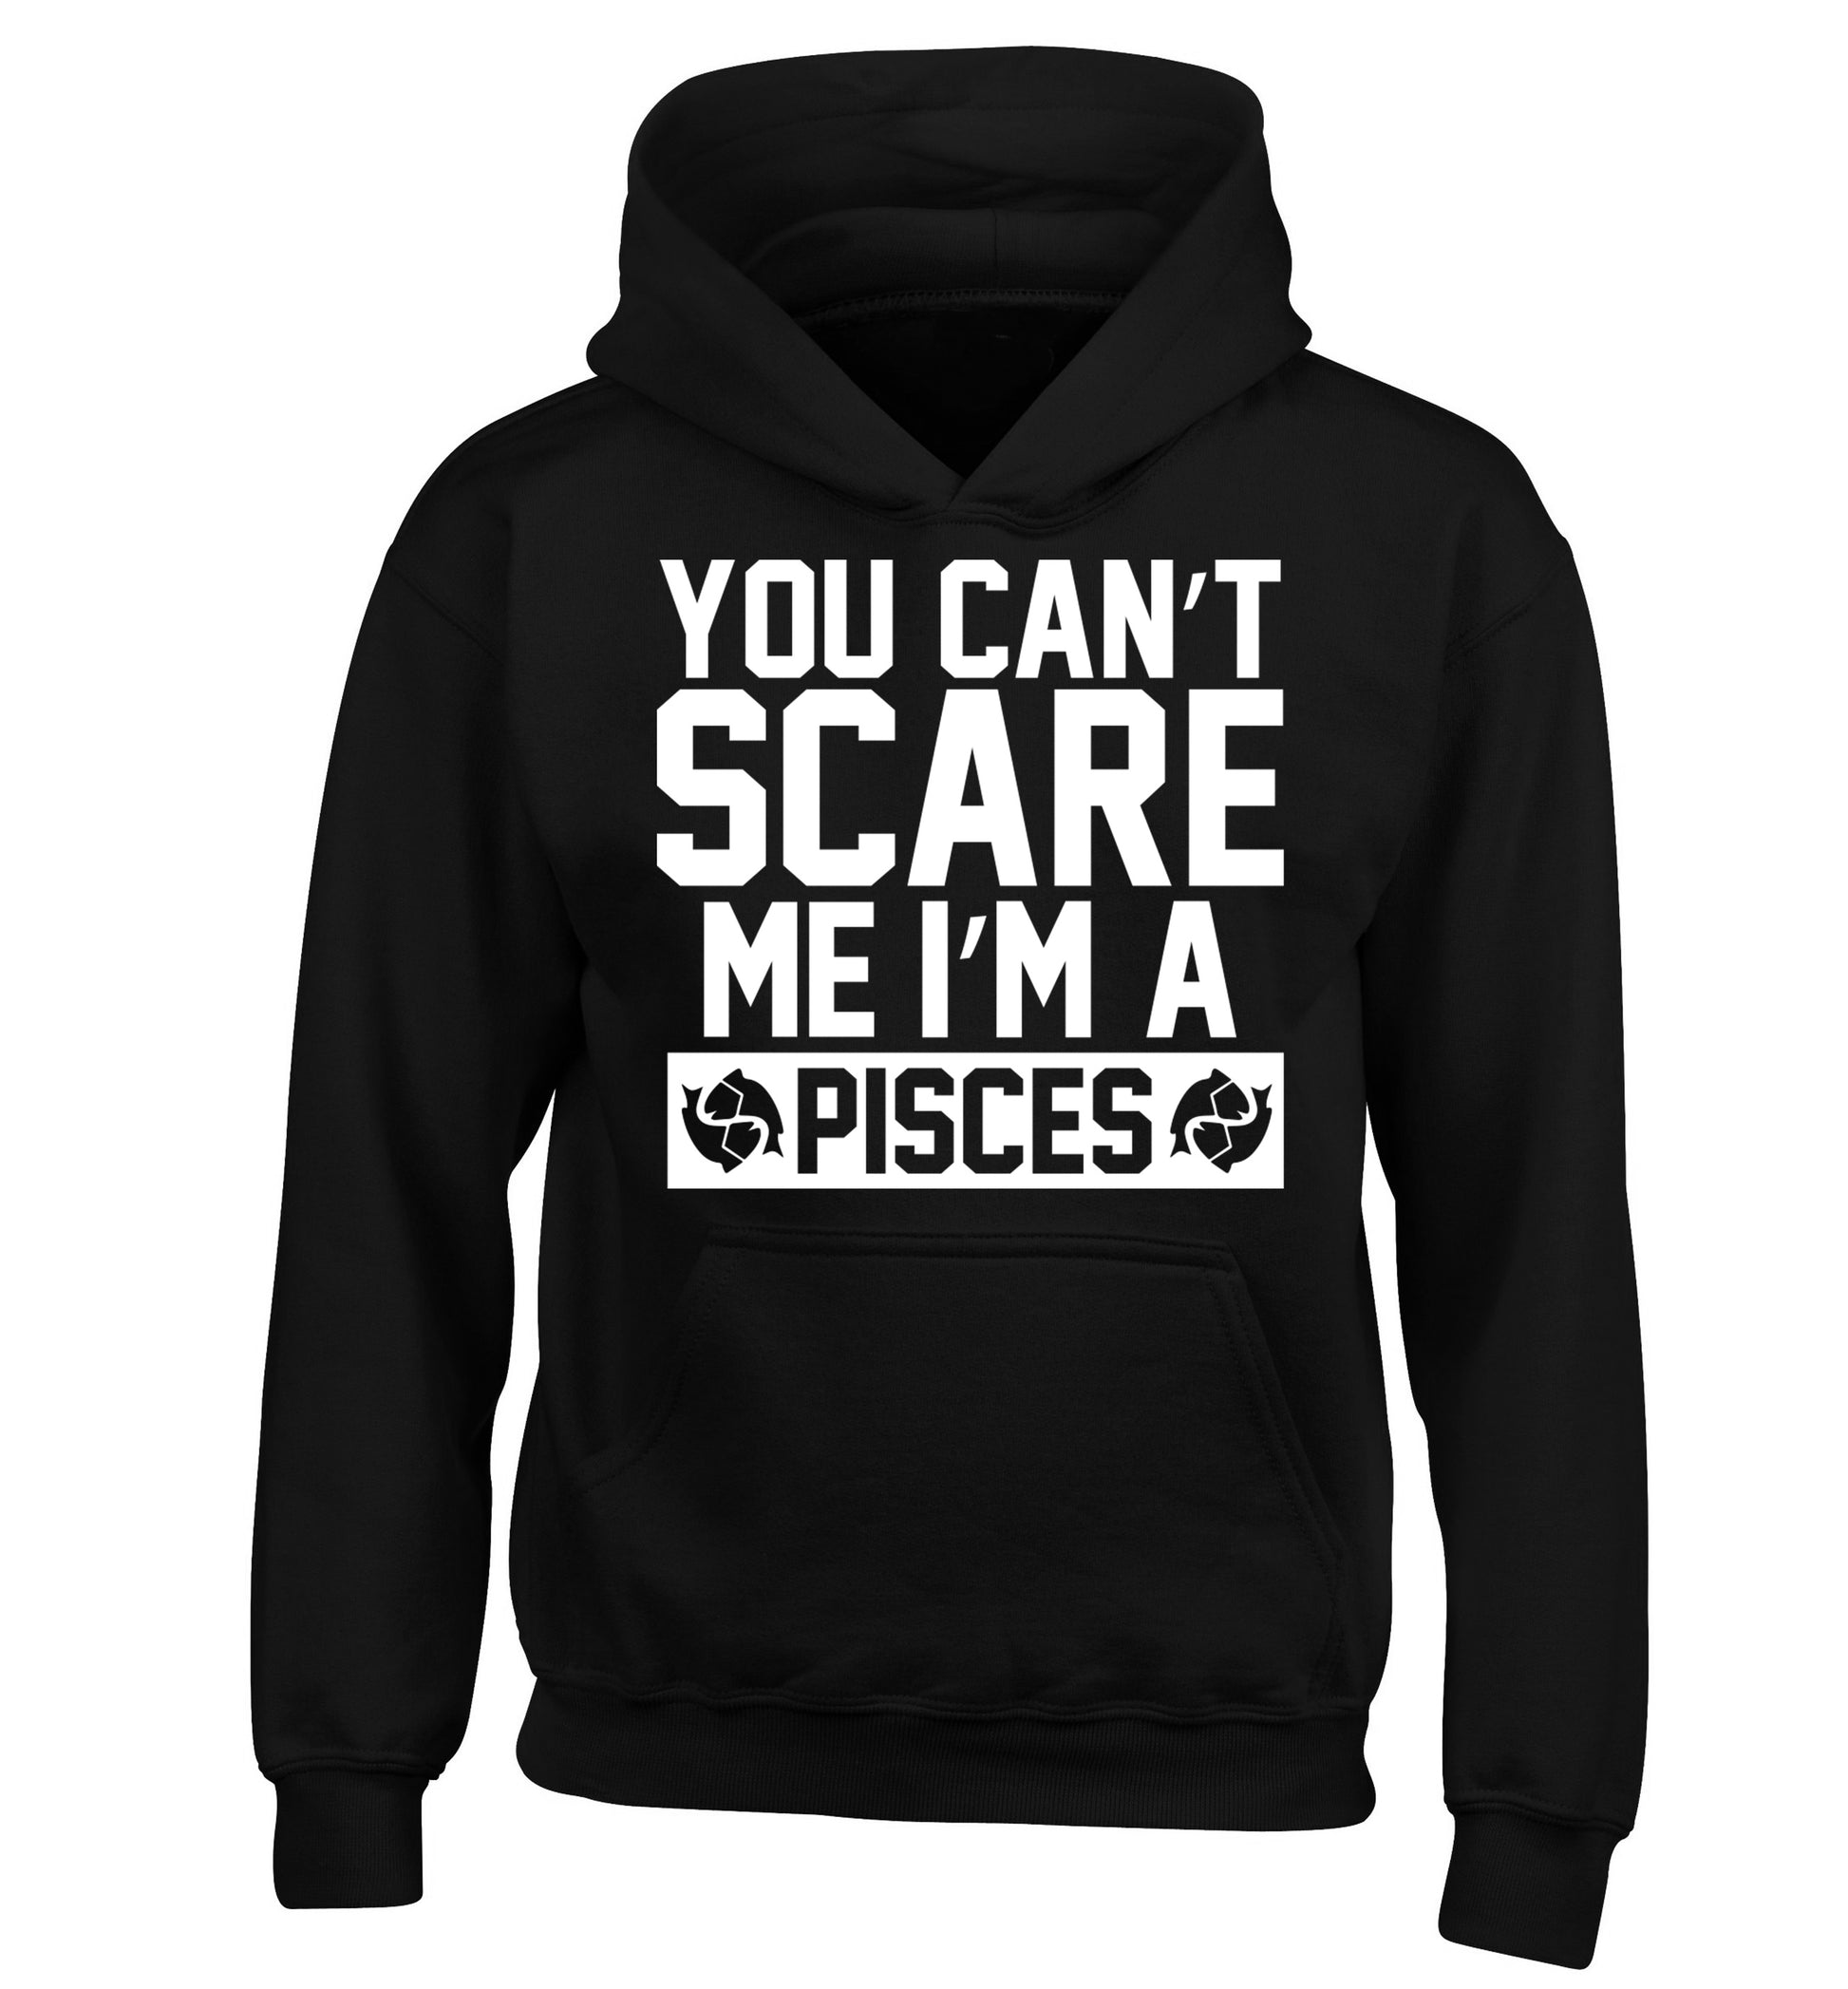 You can't scare me I'm a pisces children's black hoodie 12-13 Years